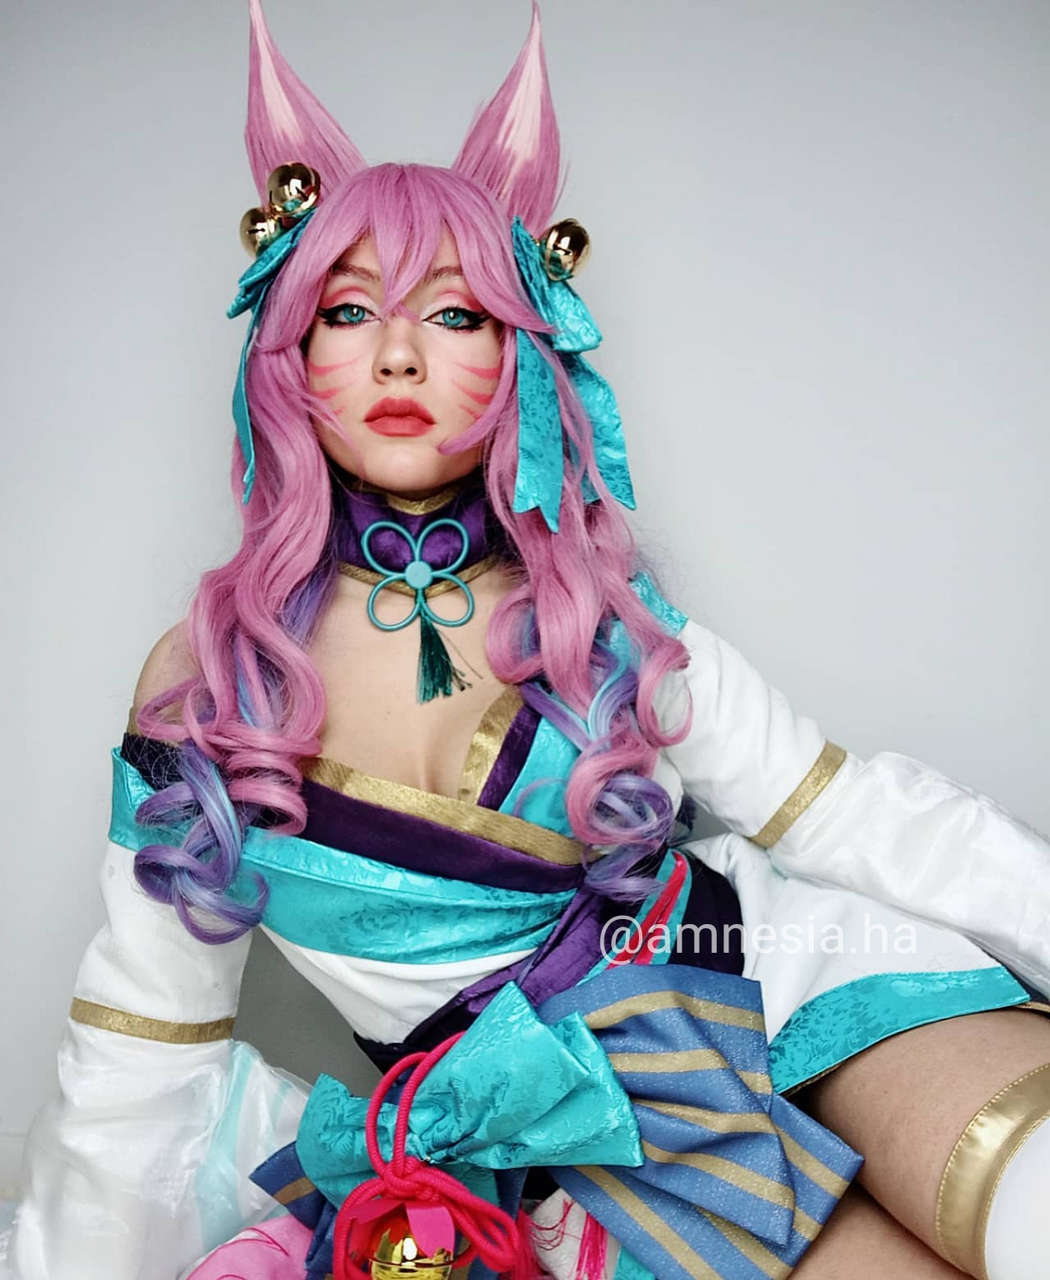 Ahri Spirit Blossom Cosplay By Amnesia Ha Its Just A Test What Do You Thin